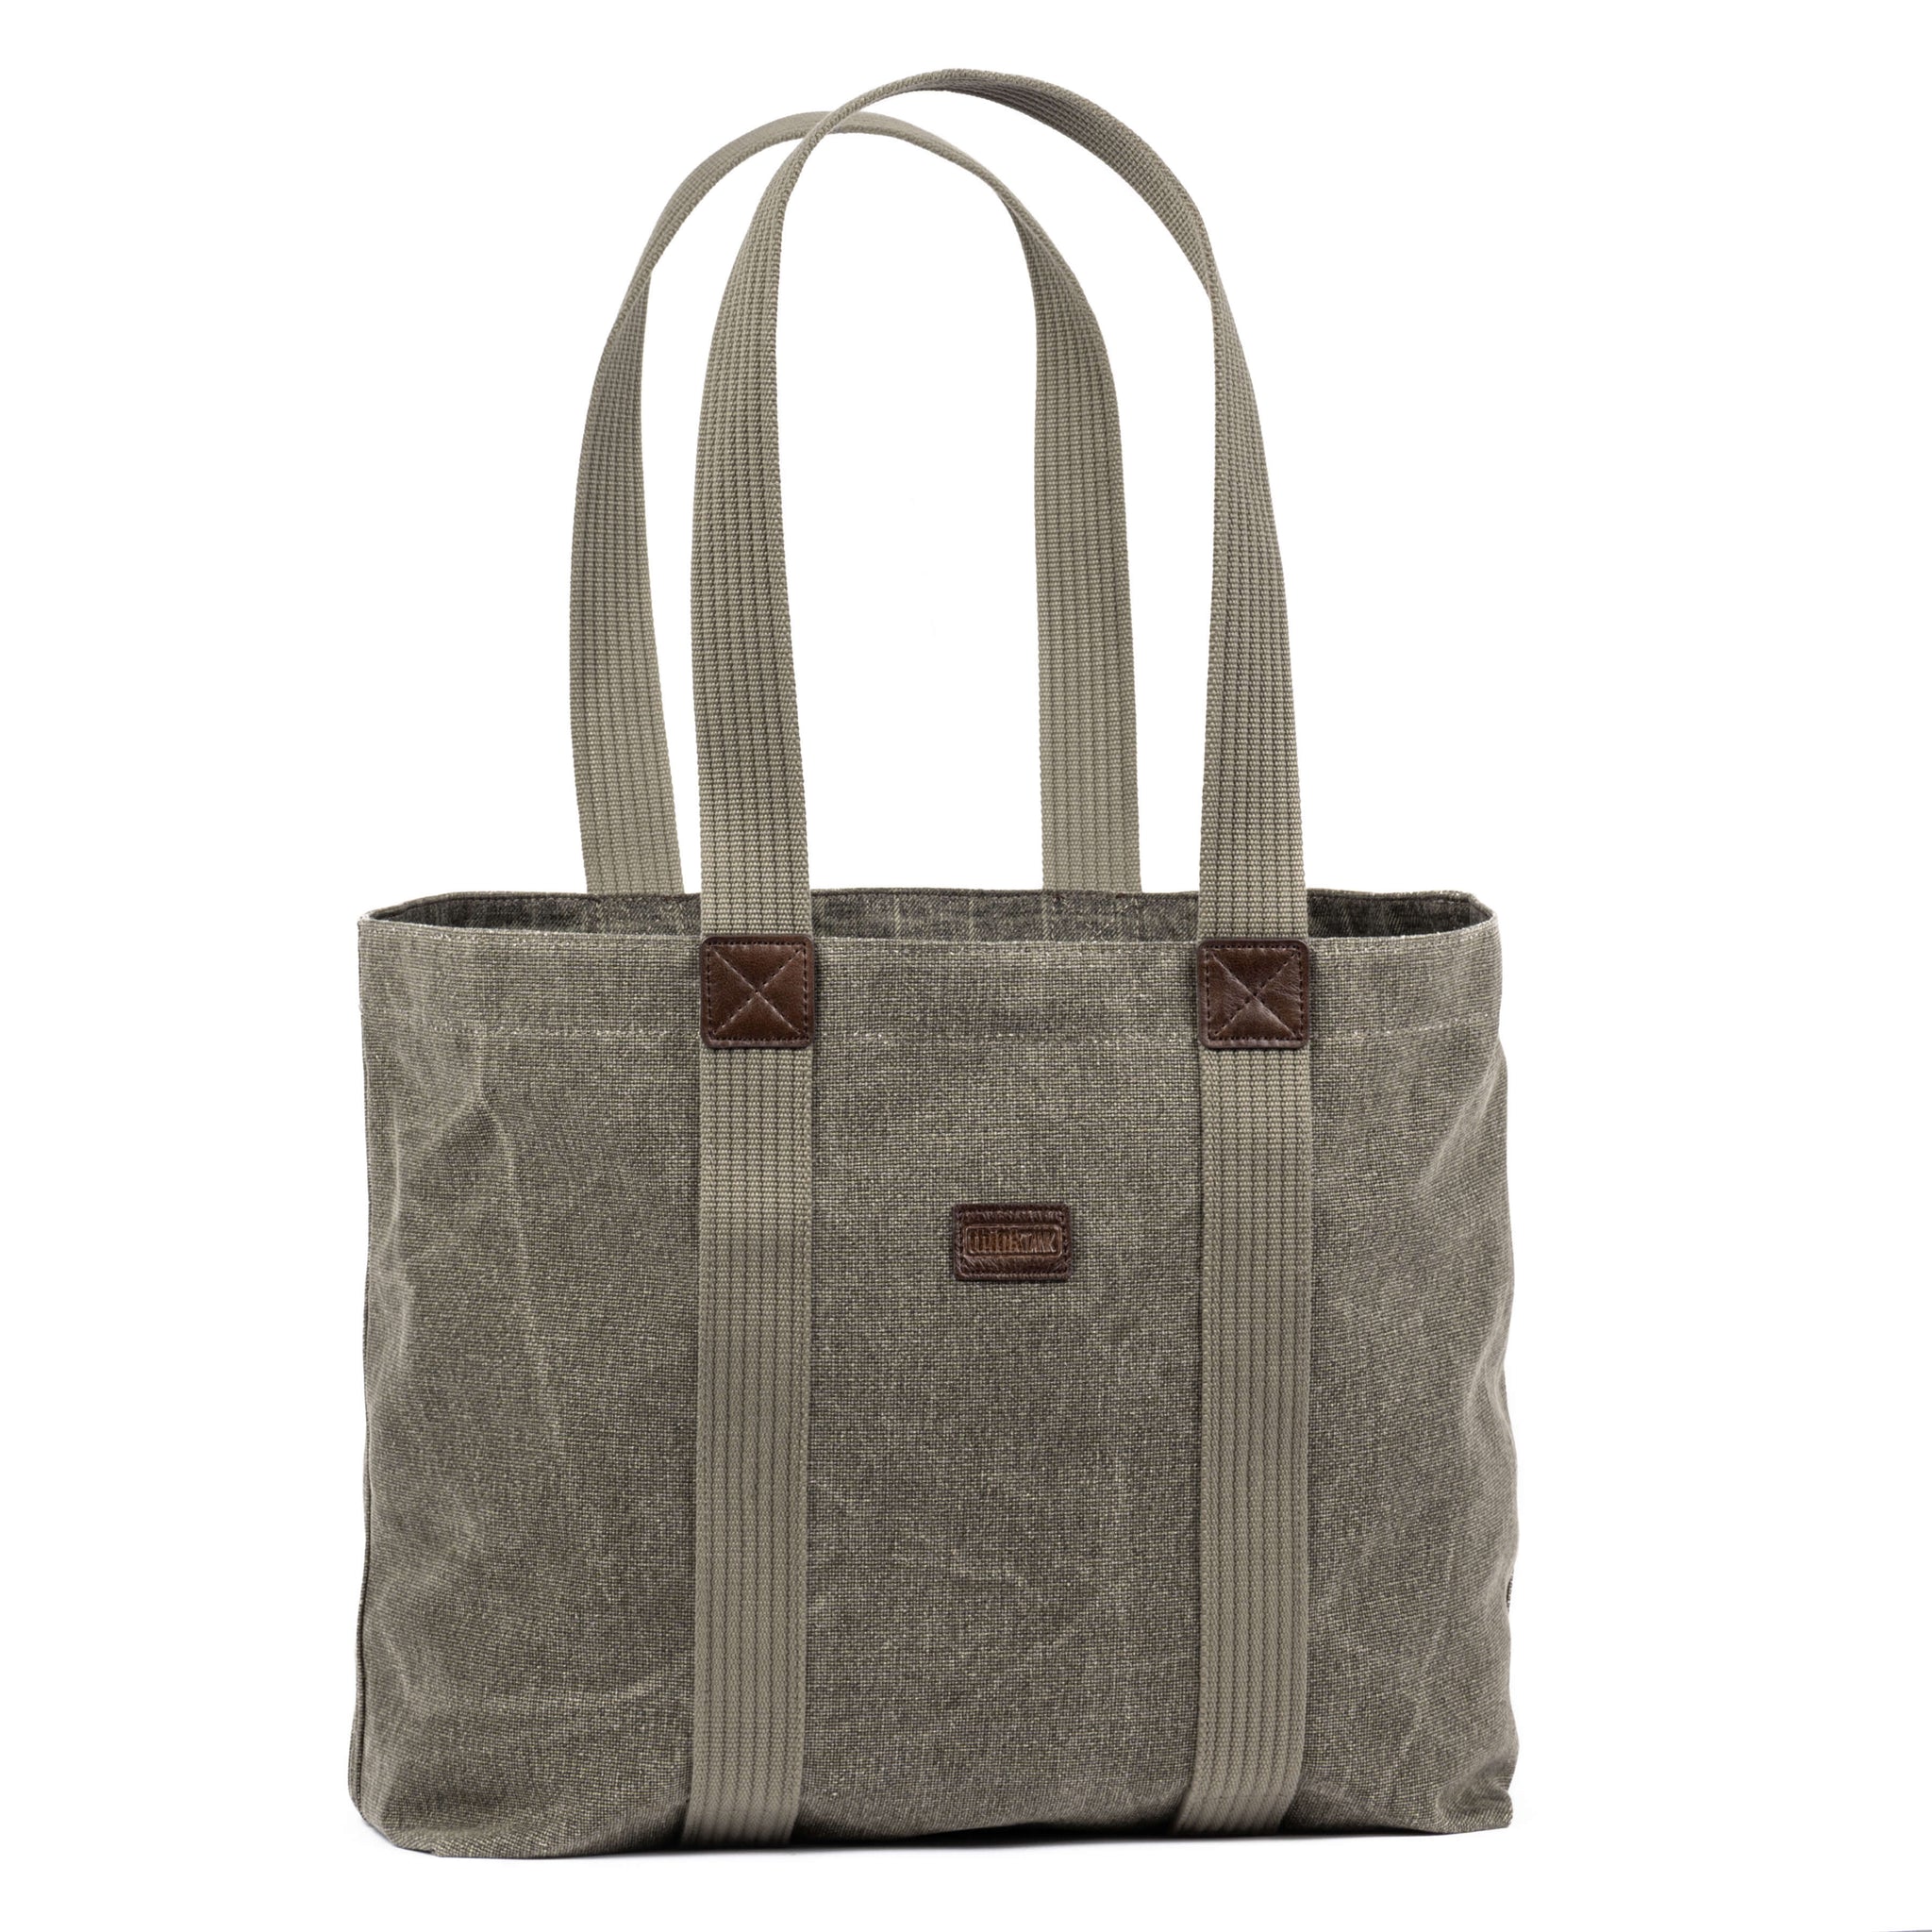 Tote Bags, Duffle Bags, Canvas Totes